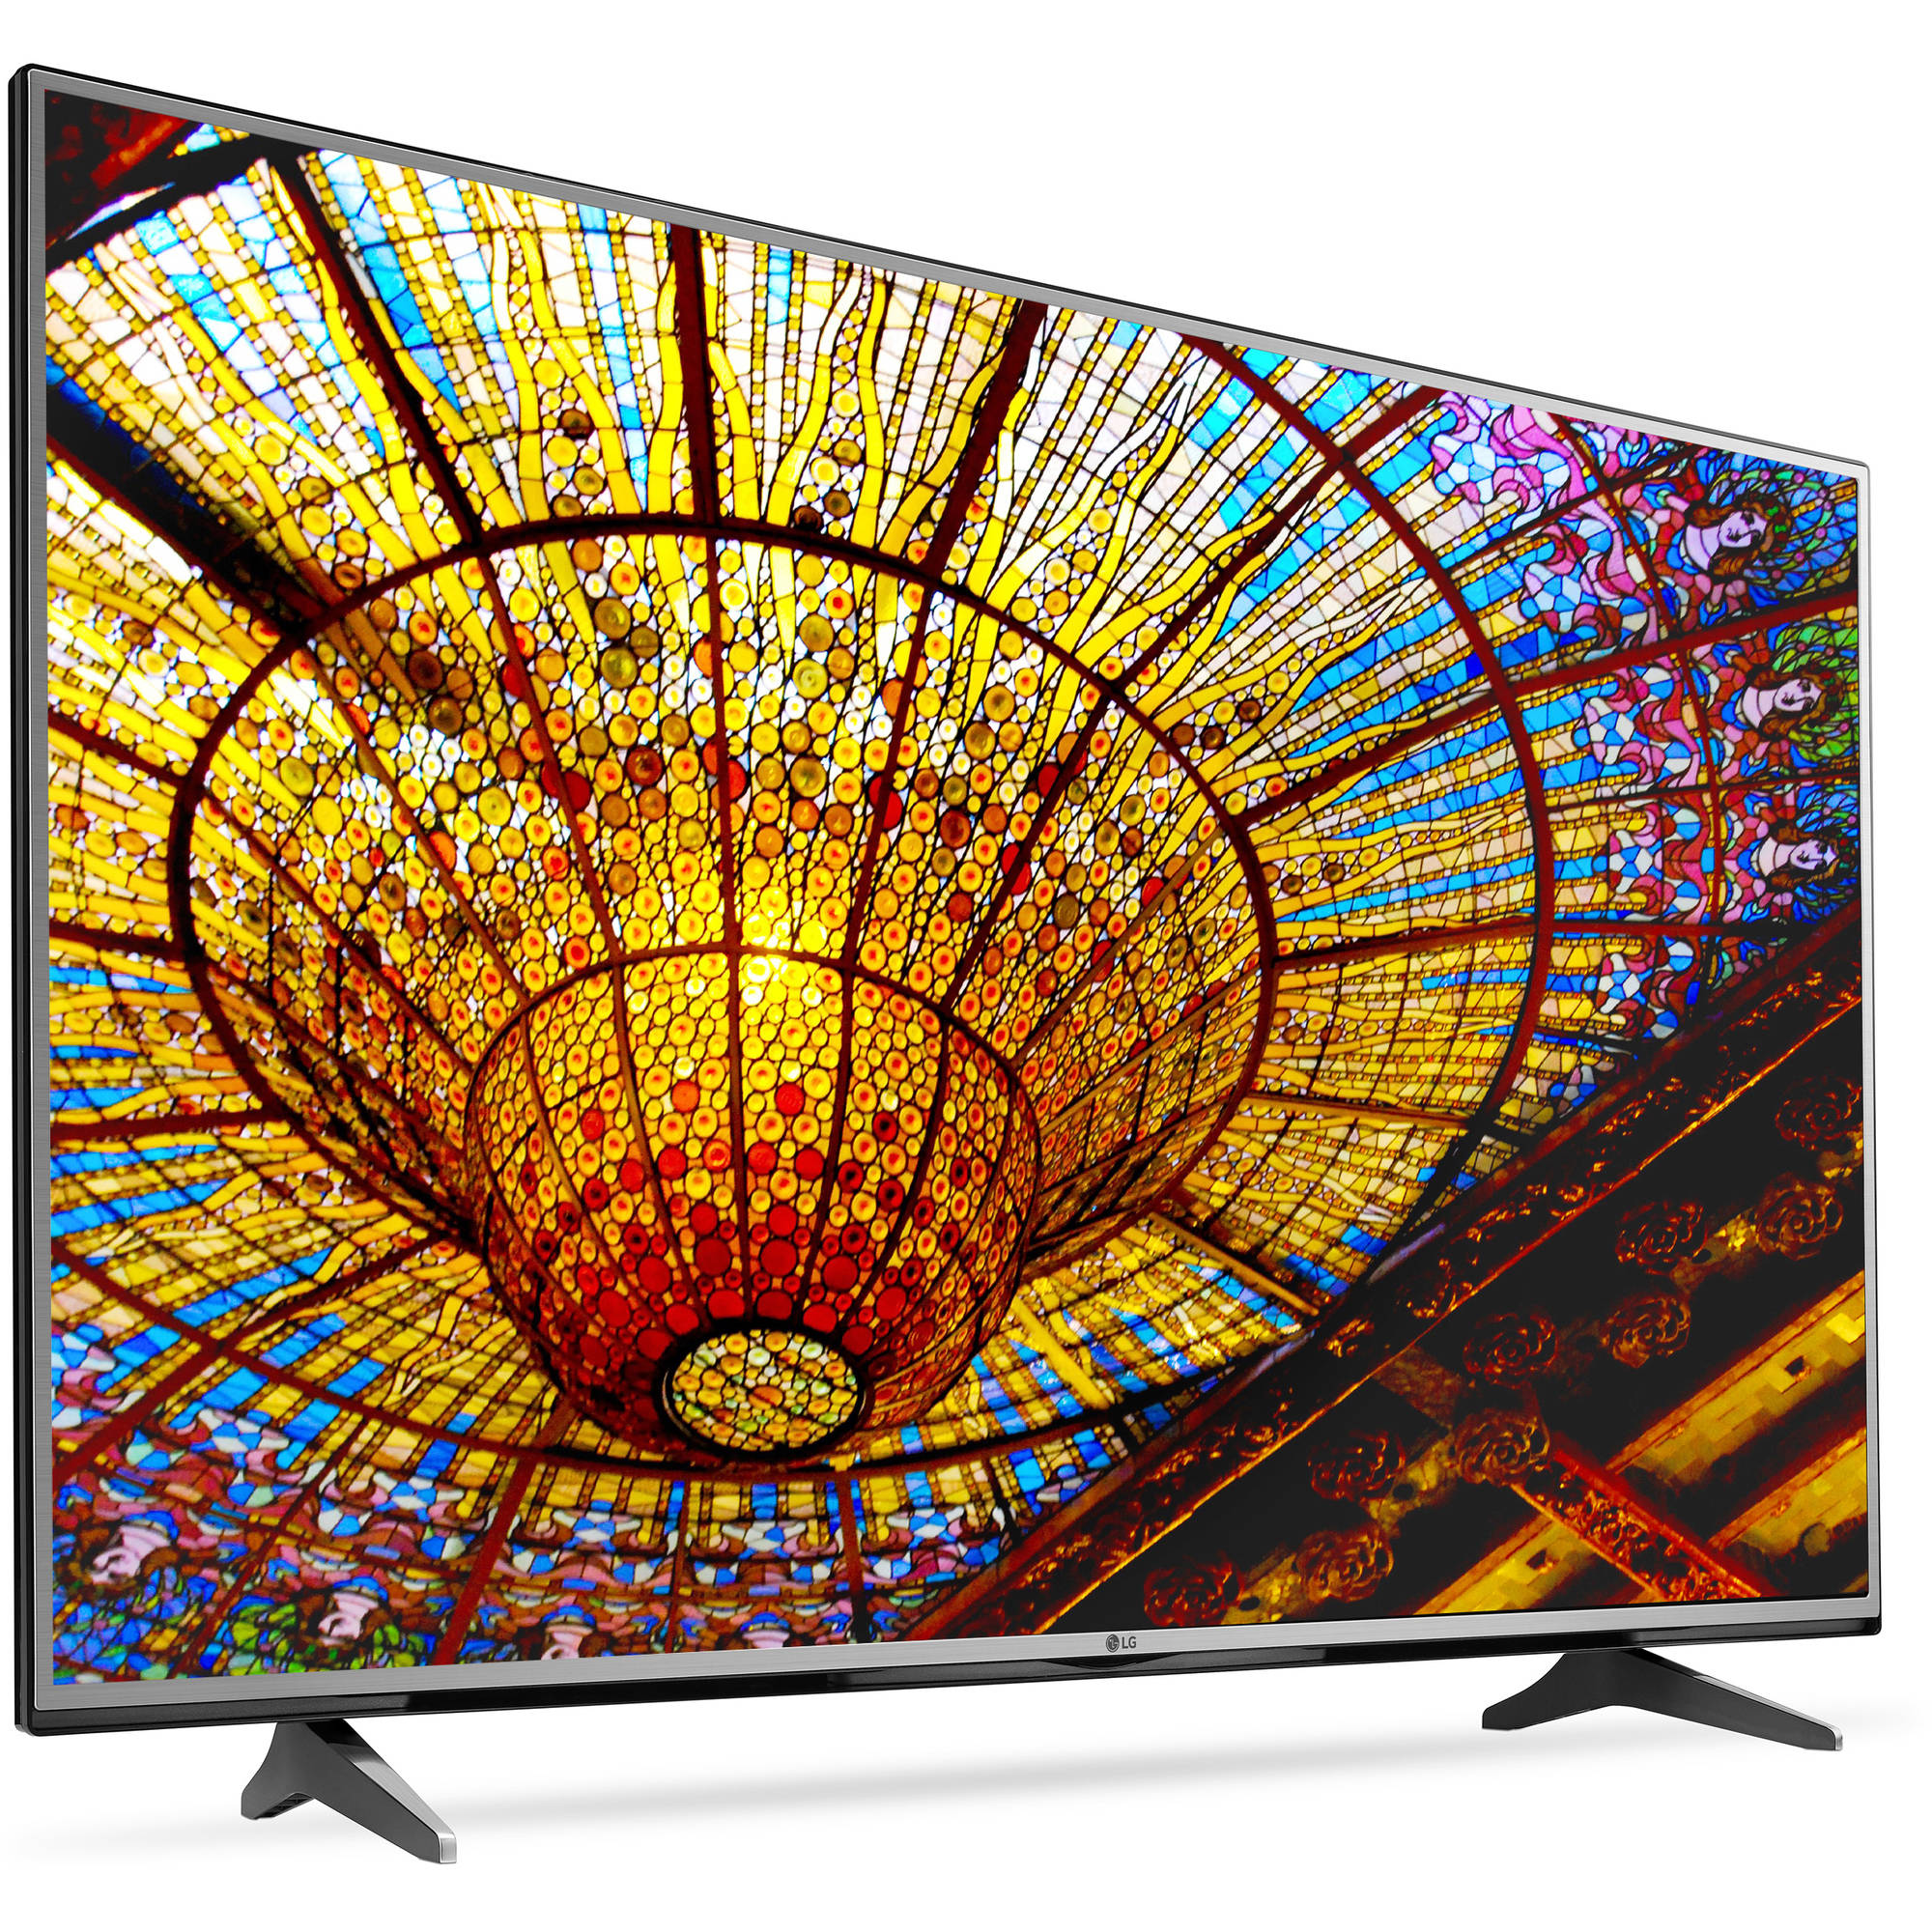 LG 55UH6150 55" 4K Ultra HD 2160p 120Hz LED Smart HDTV (4K x 2K) - image 1 of 9